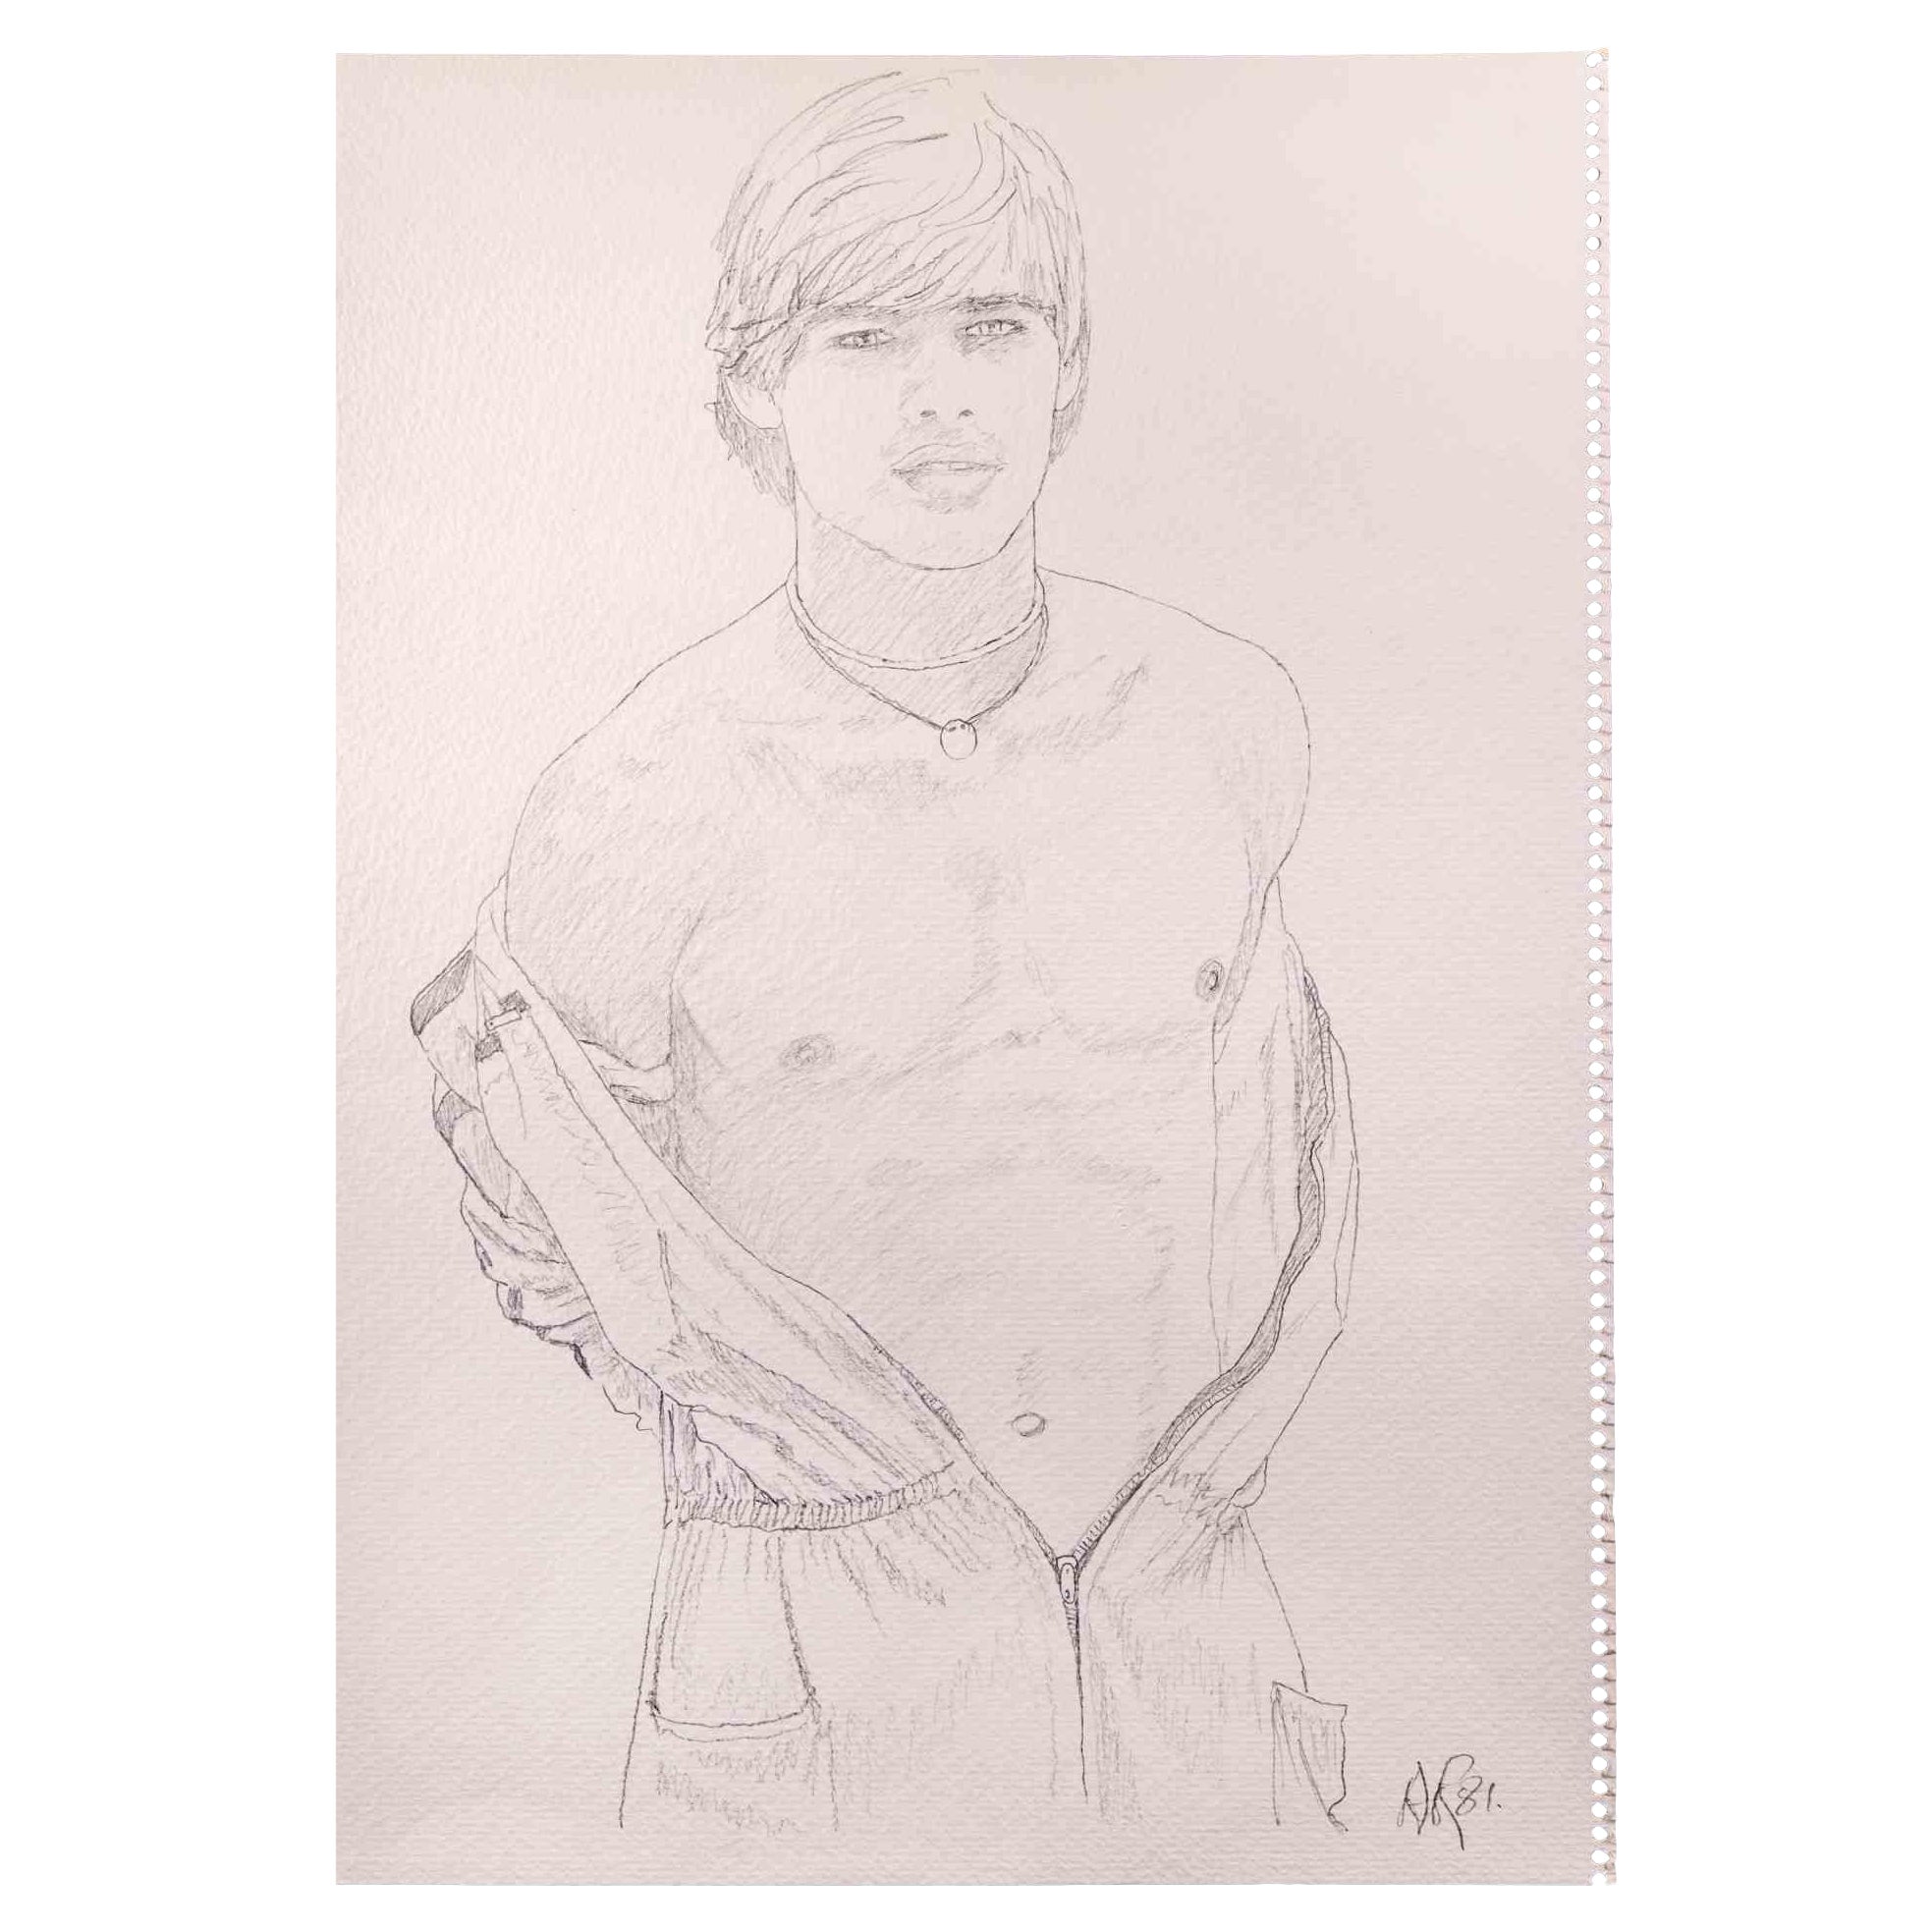 Portrait of a Boy - Original Pencil Drawing by Anthony Roaland - 1981